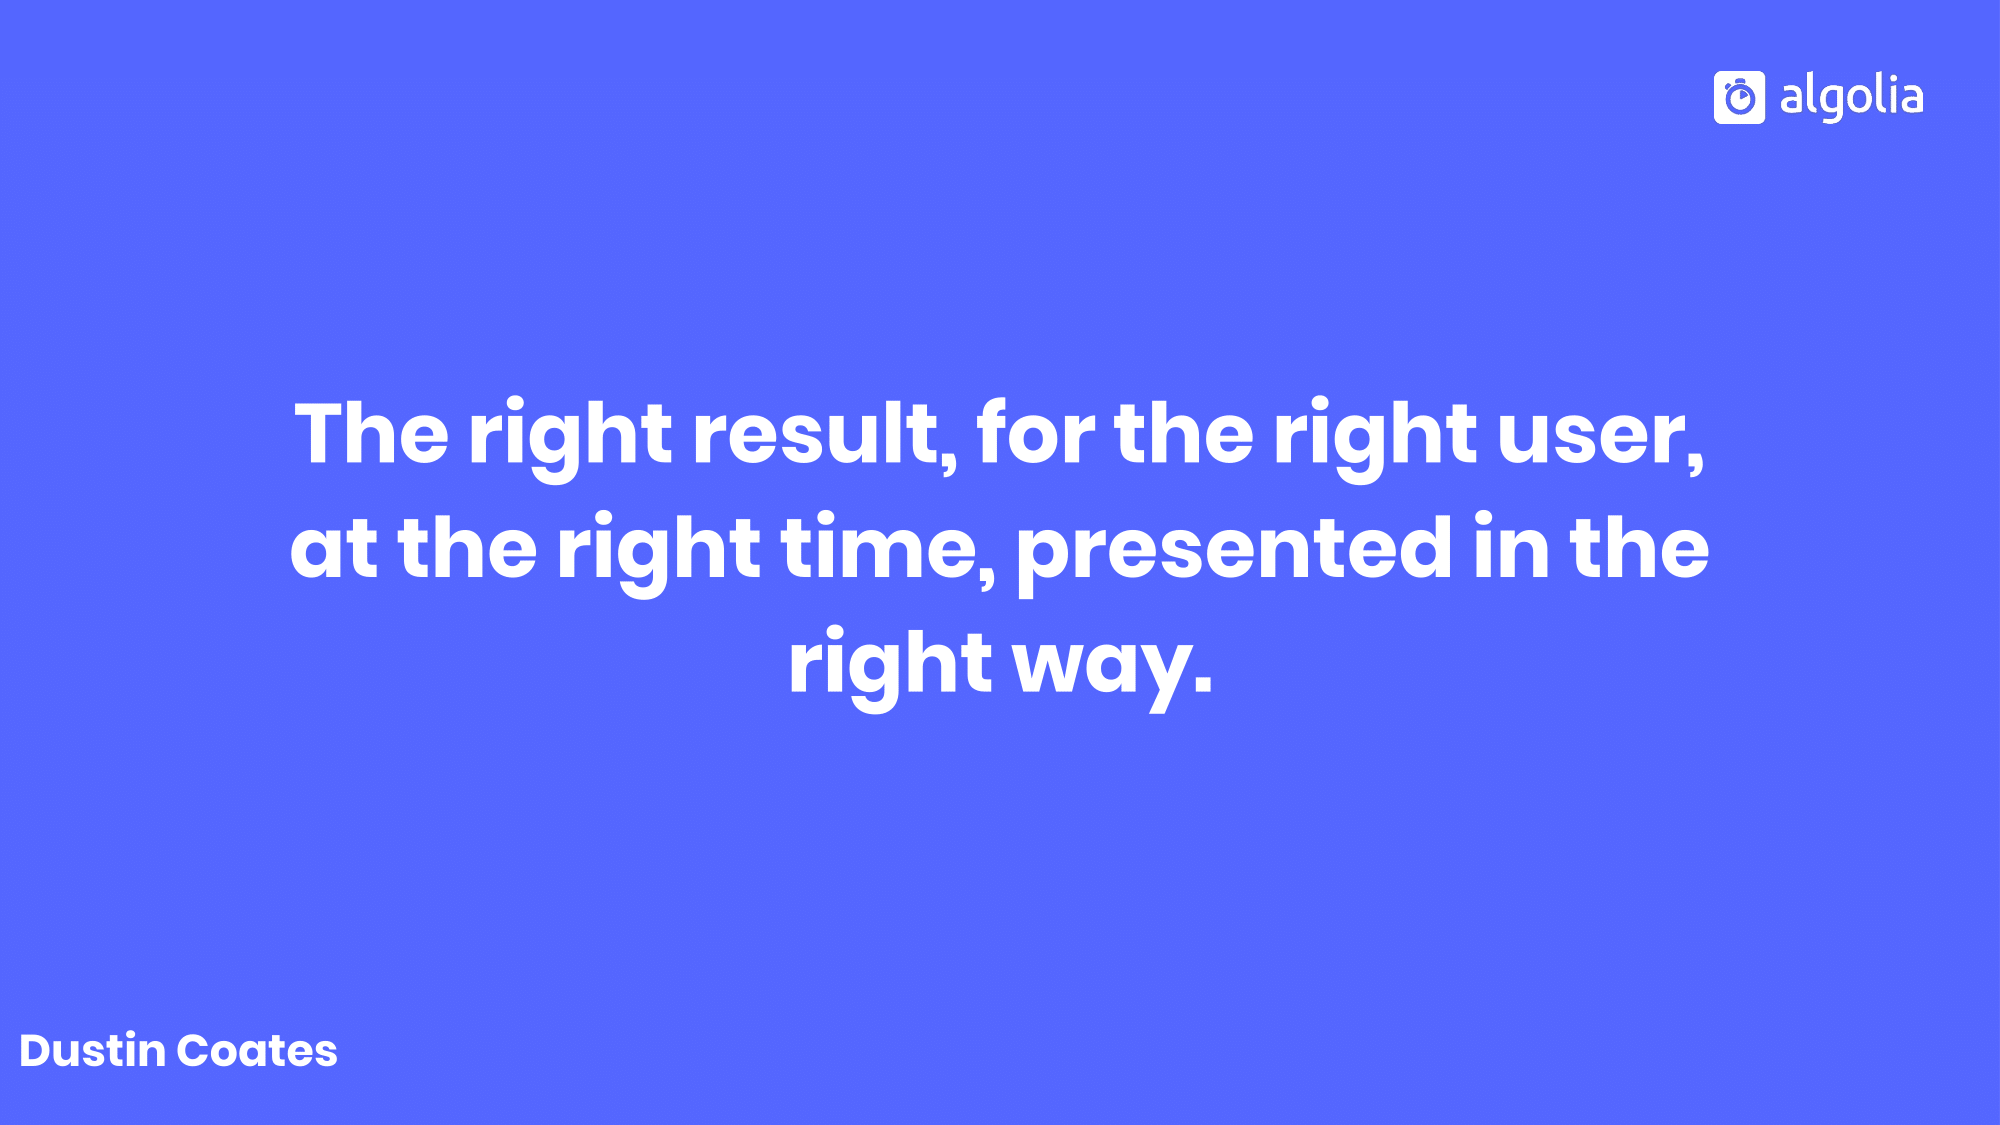 The right result for the right user at the right time, presented in the right way